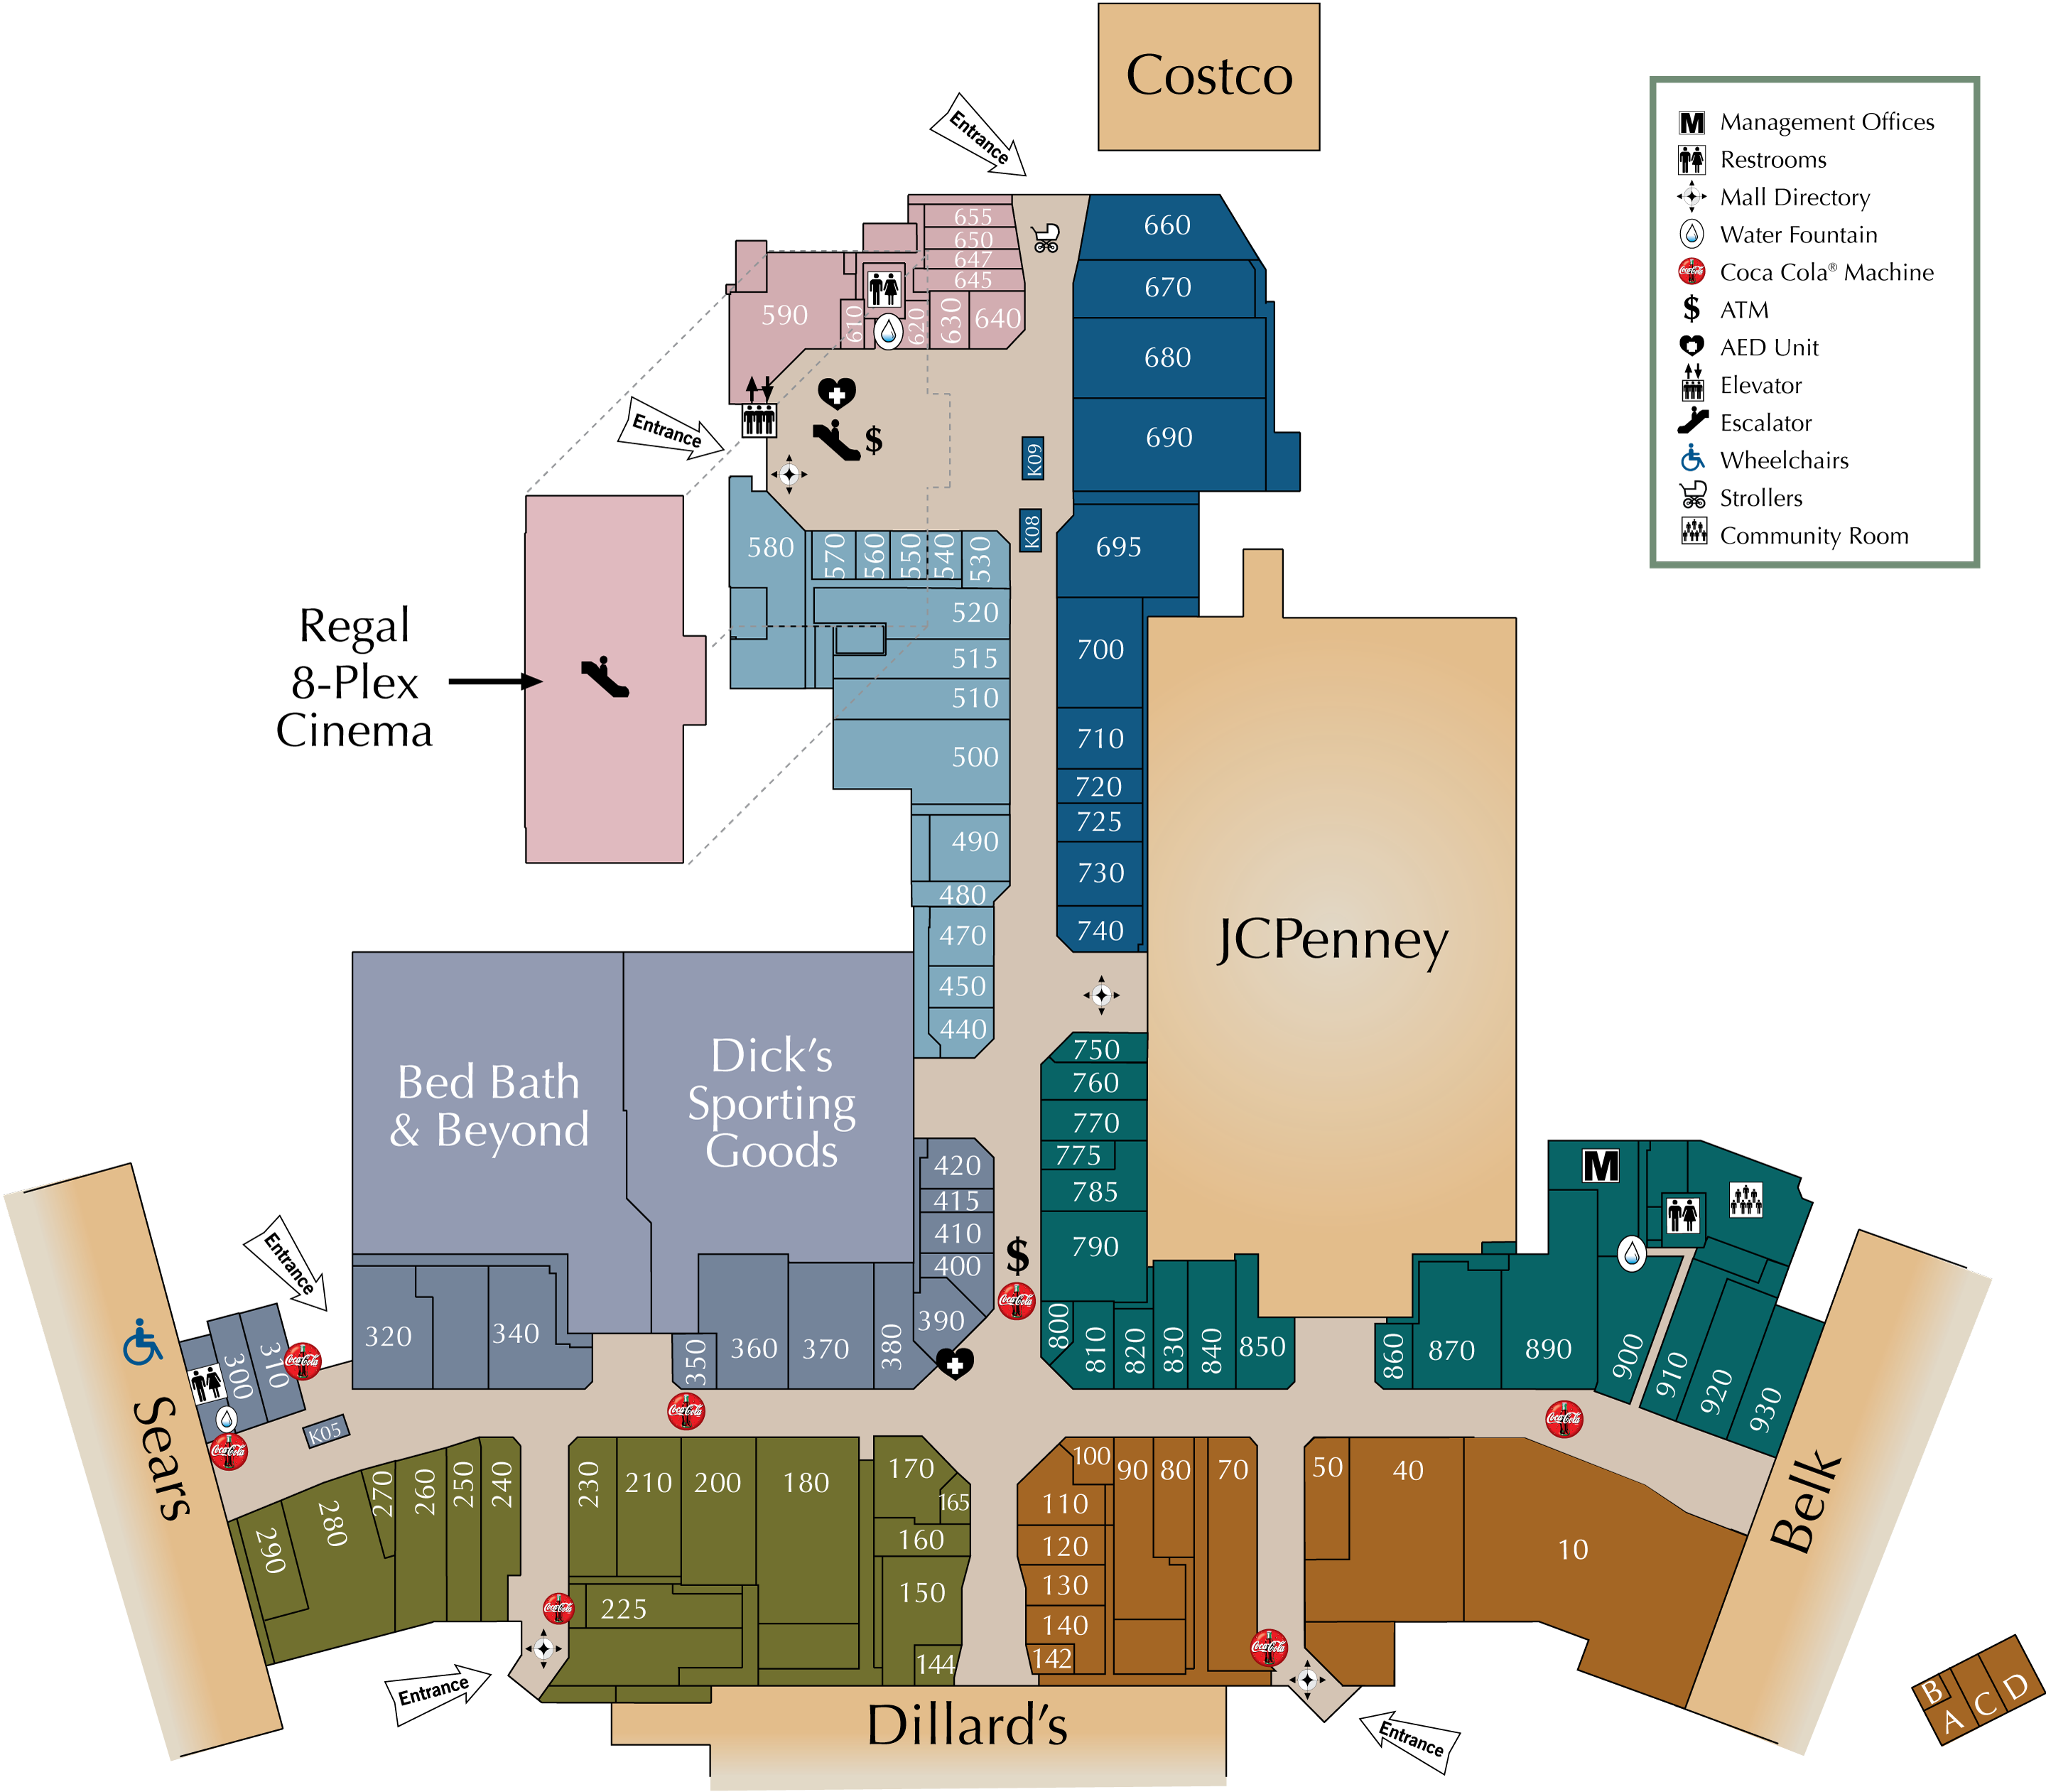 Mall Directory | WestGate Mall